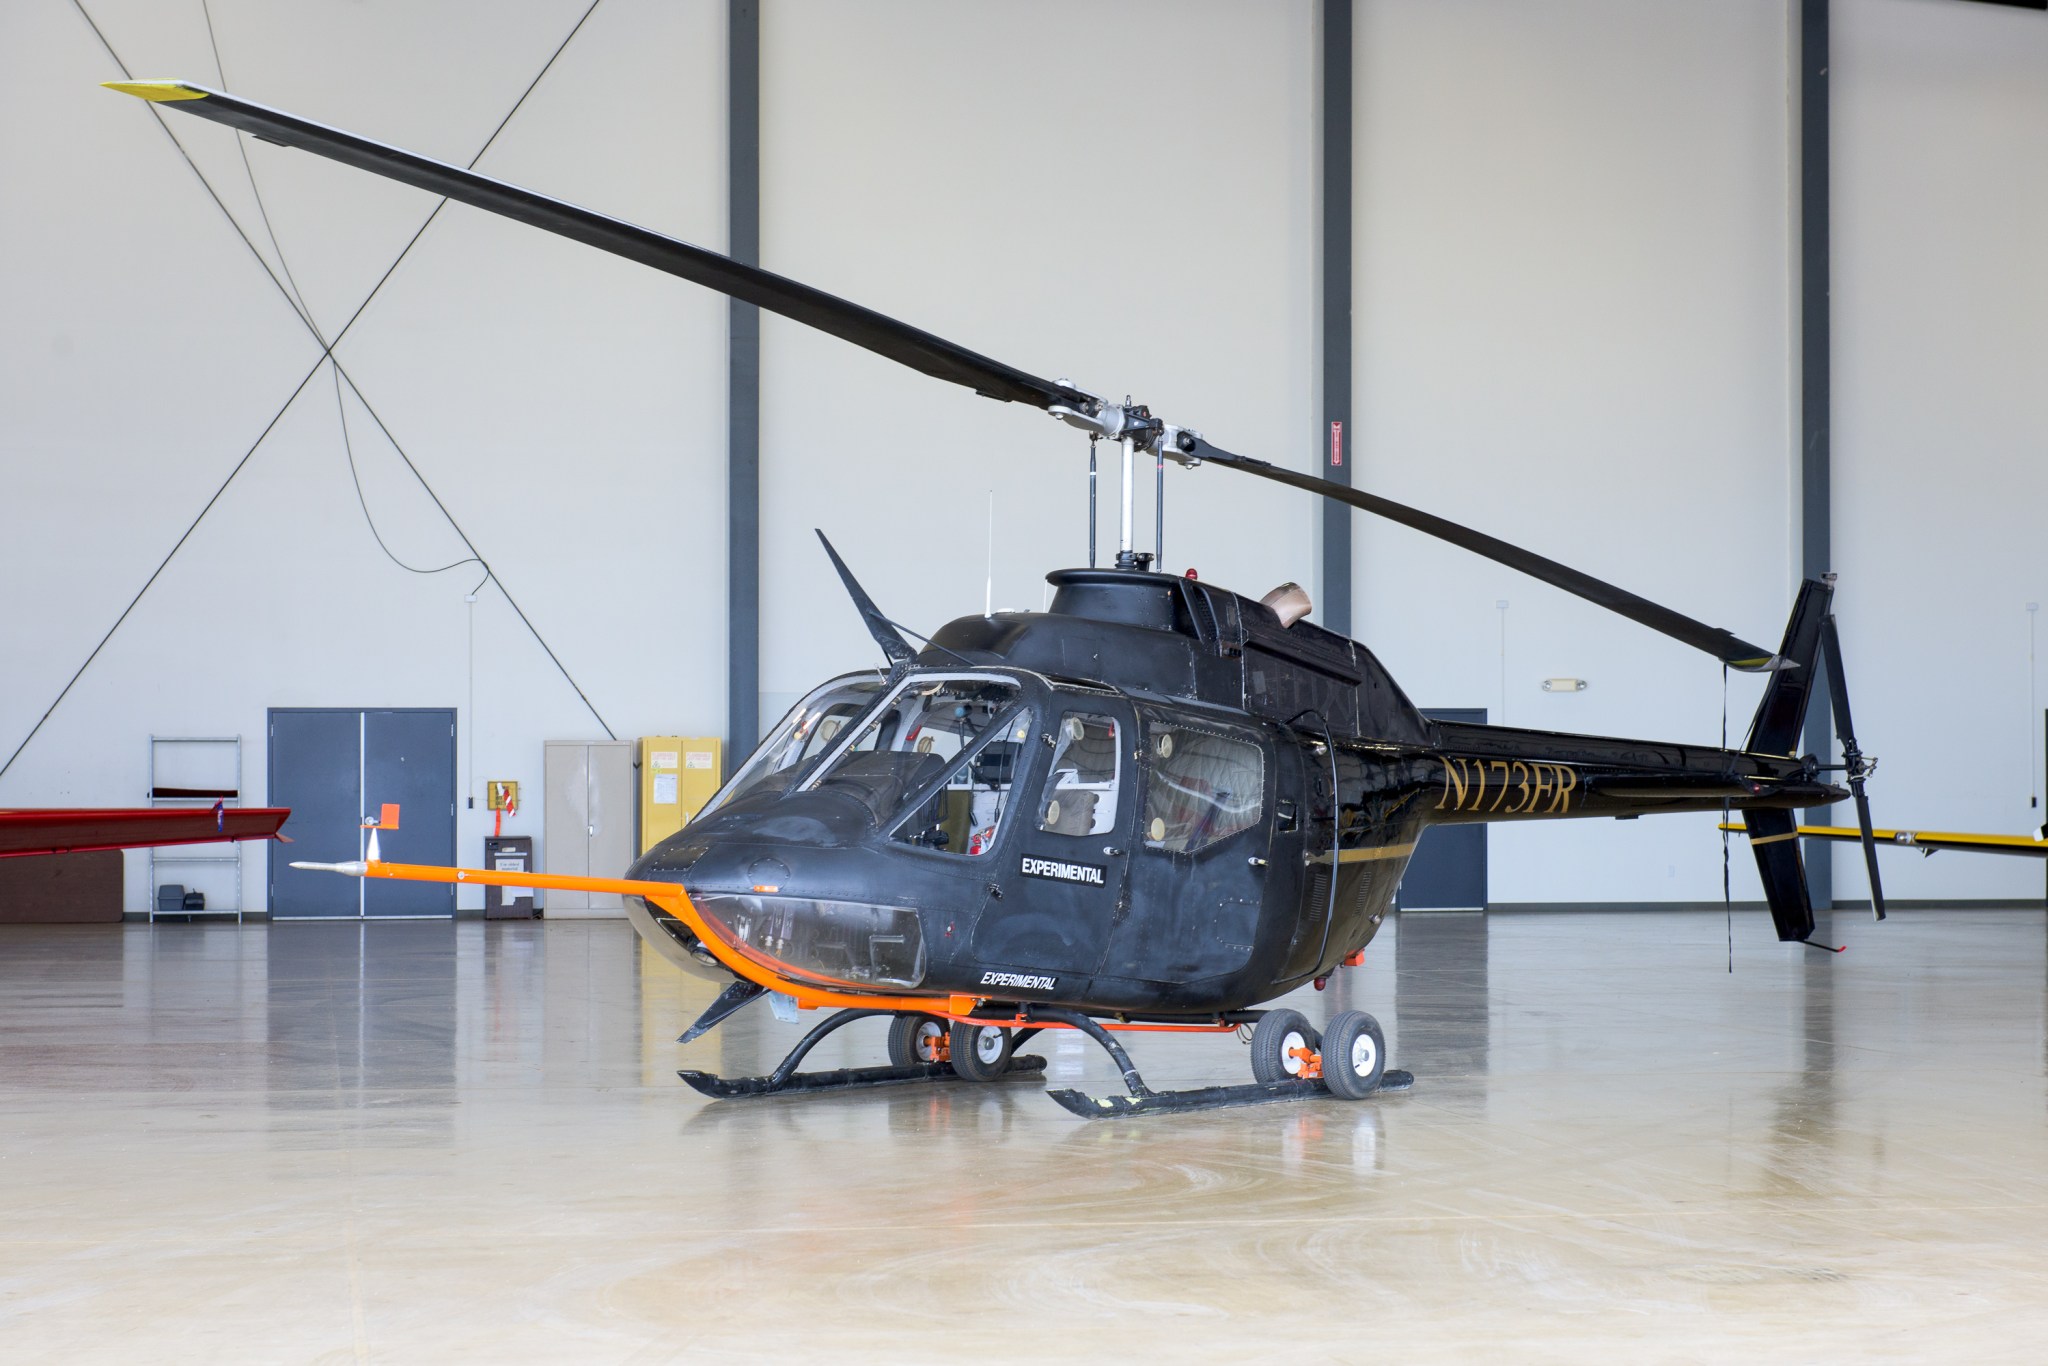 Bell OH-58C Kiowa helicopter is owned by Flight Research Inc. in Mojave, California.